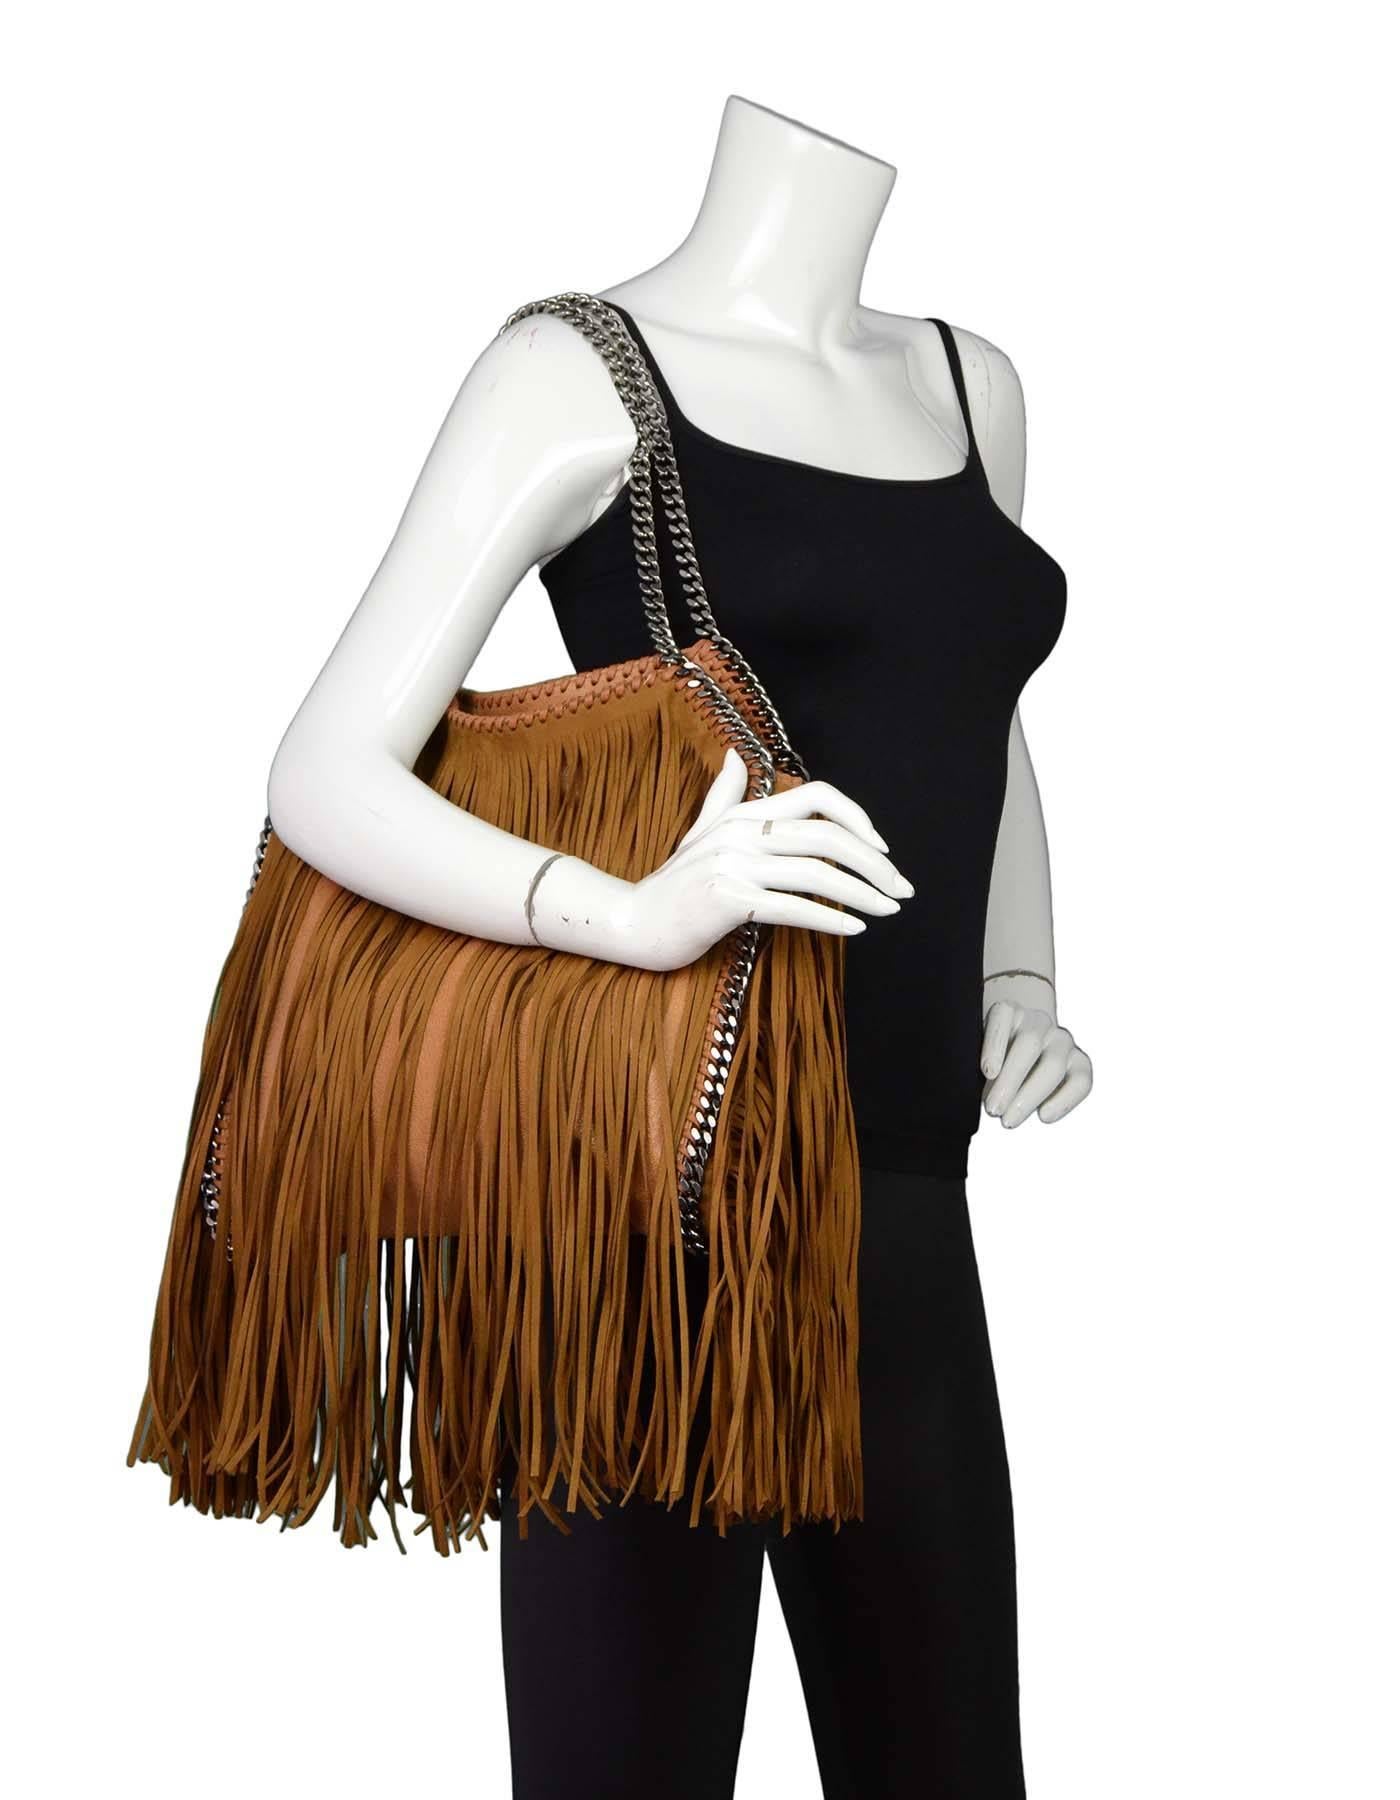 Stella McCartney Tan Fringe Falabella Tote with SHW

Made In: Italy
Color: Tan
Hardware: Gunmetal
Materials: Vegan leather
Lining: Pink textile
Closure/Opening: Open top with single magnetic snap closure
Exterior Pockets: None
Interior